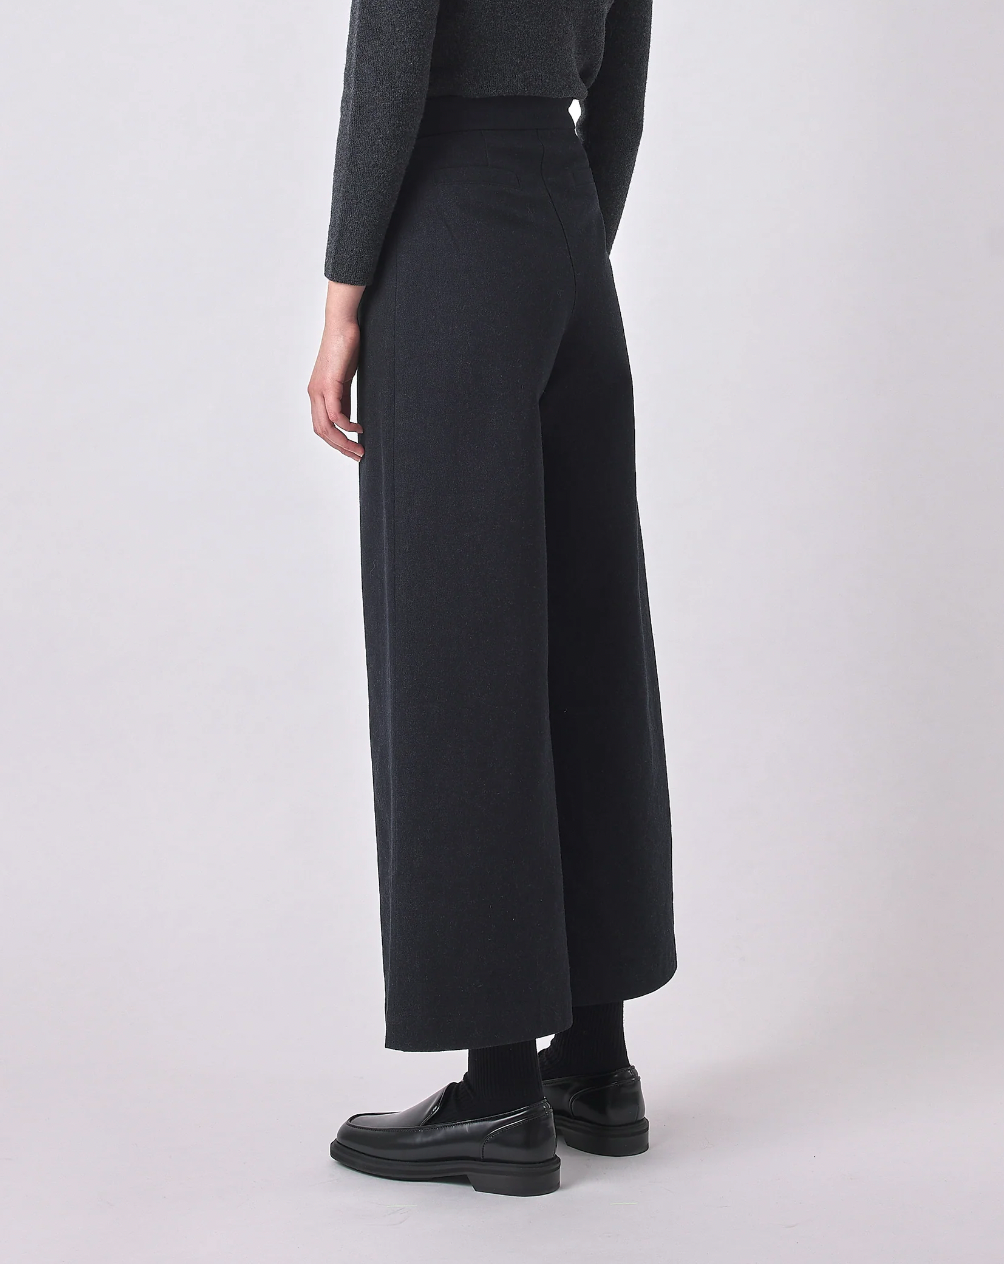 Product Image for Signature Wide-Leg Trouser, Navy Black